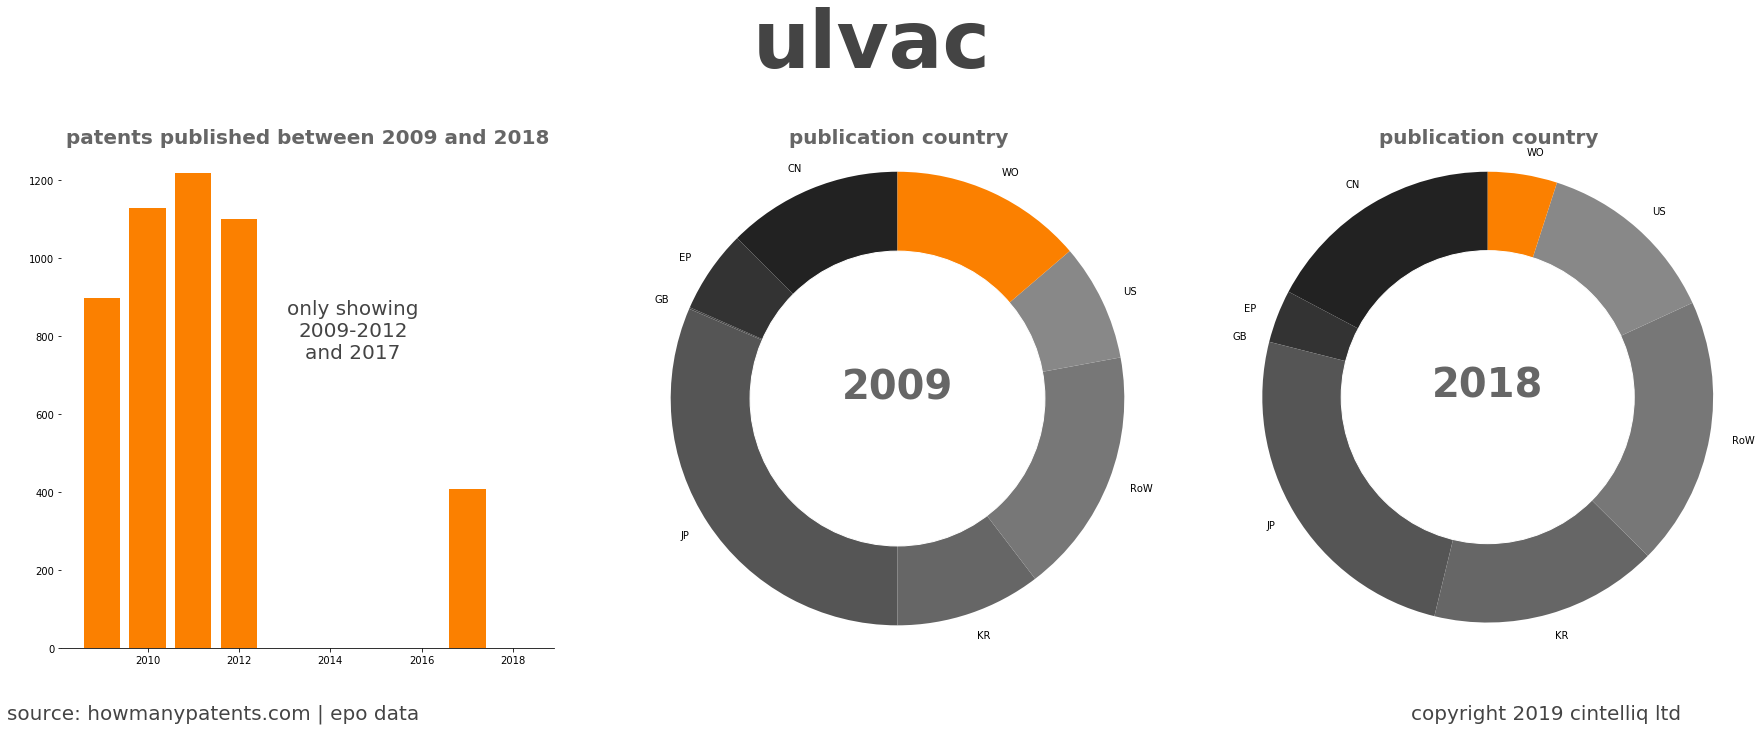 summary of patents for Ulvac